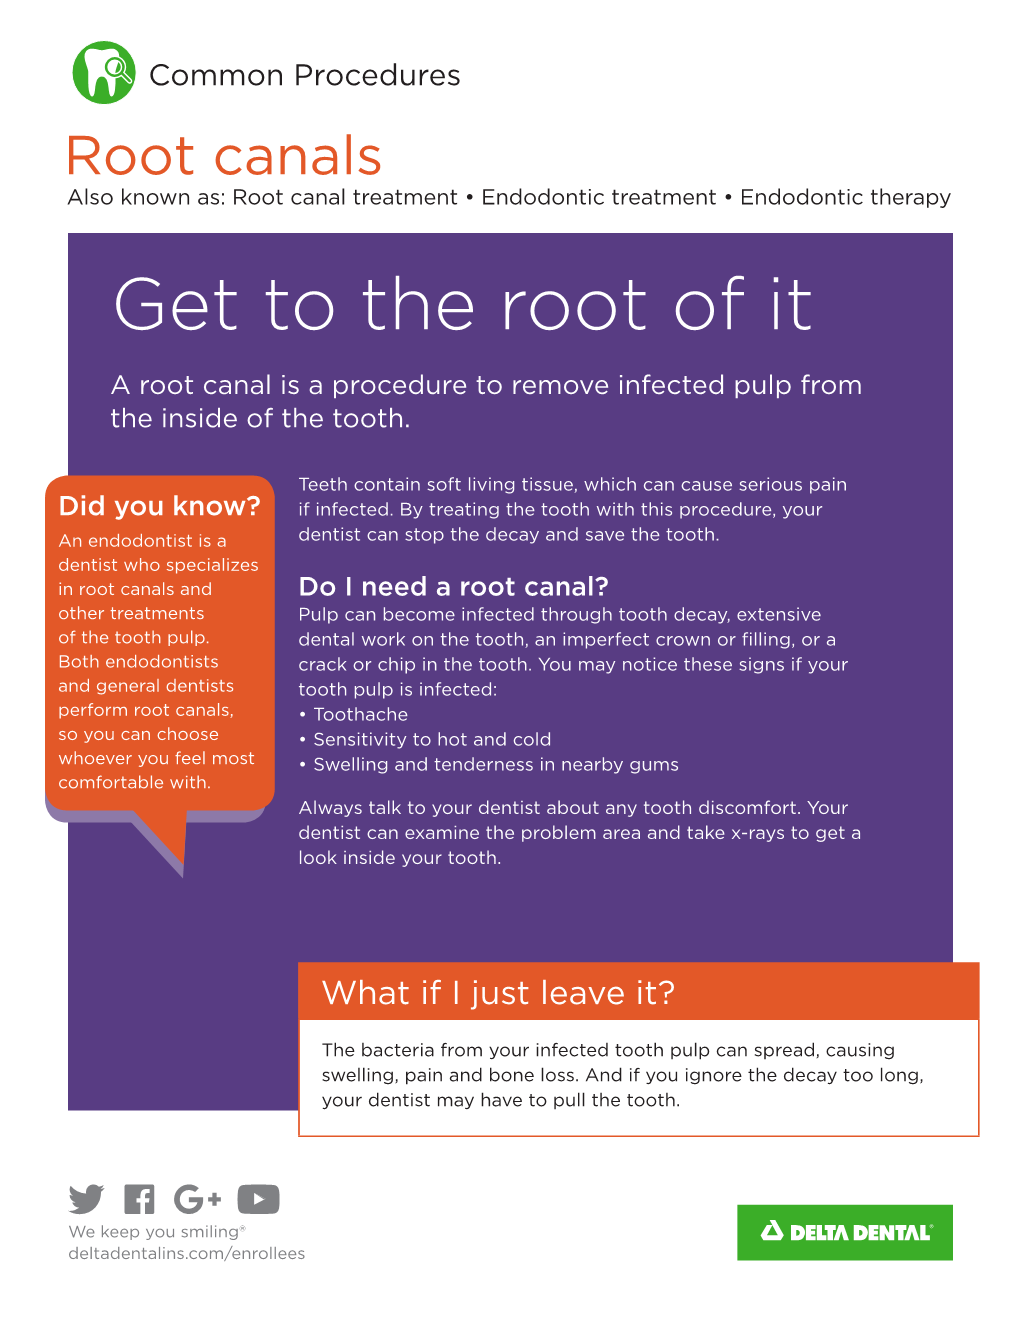 Root Canals Also Known As: Root Canal Treatment • Endodontic Treatment • Endodontic Therapy Get to the Root of It